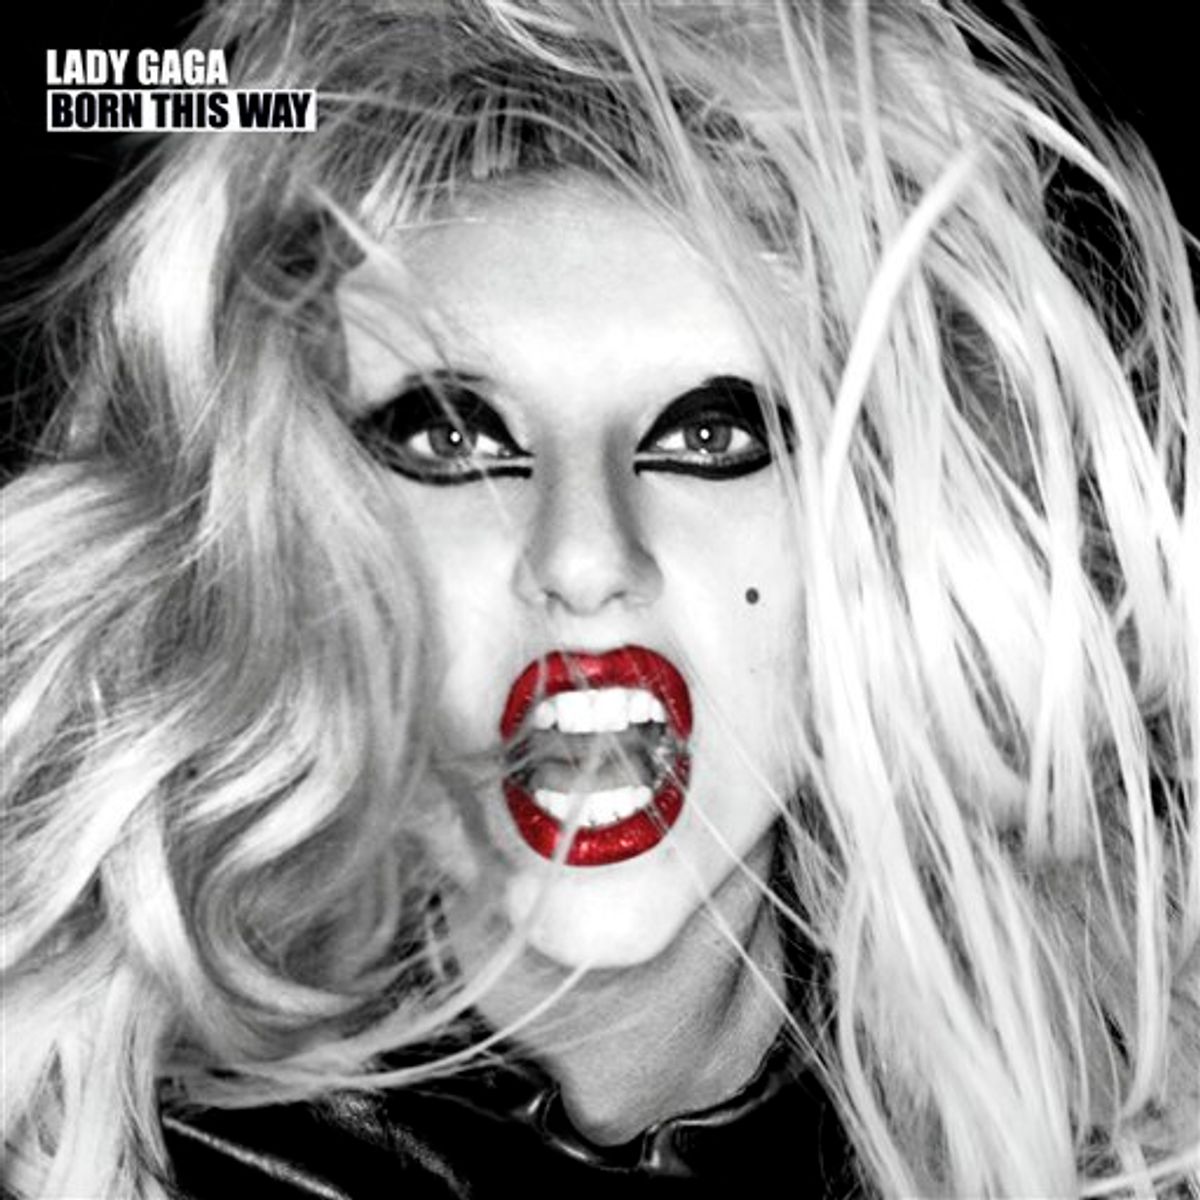 FILE - In this file CD cover image released by Interscope Records, the latest release by Lady Gaga, Born This Way, is shown. Amazon experienced a high volume of traffic that caused delays for those downloading the album  echoing a posting on the album's product page on Amazon.com. (AP Photo/Interscope Records, File) (AP)